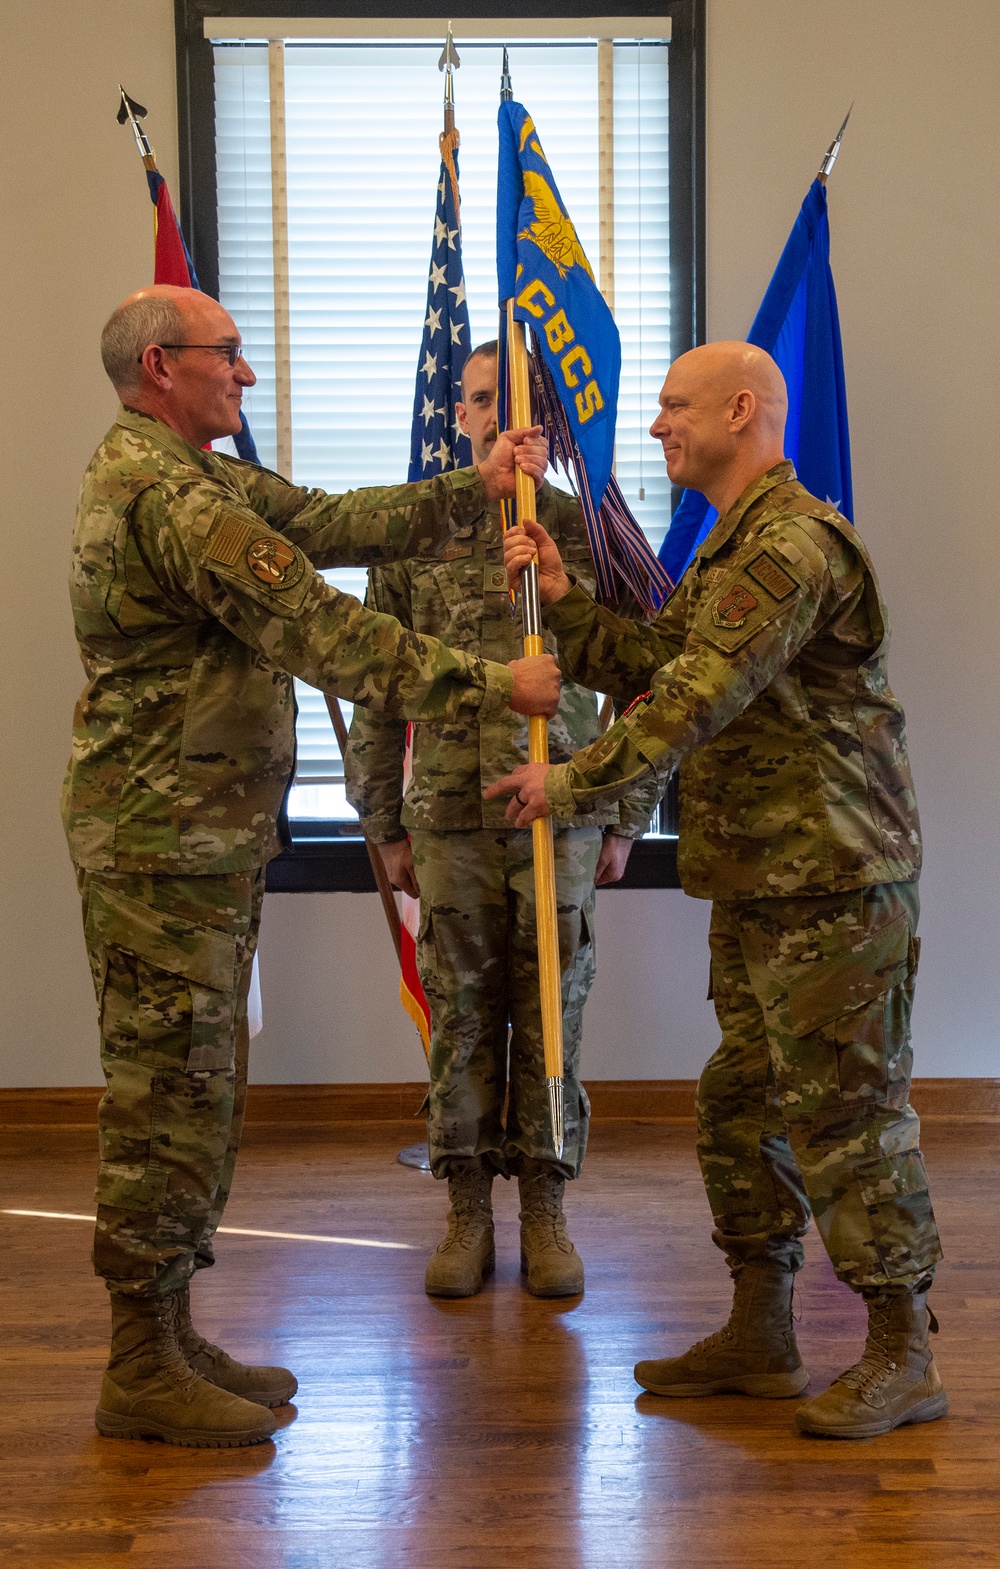 Lt. Col. Roestel assumes command of the 239th CCS